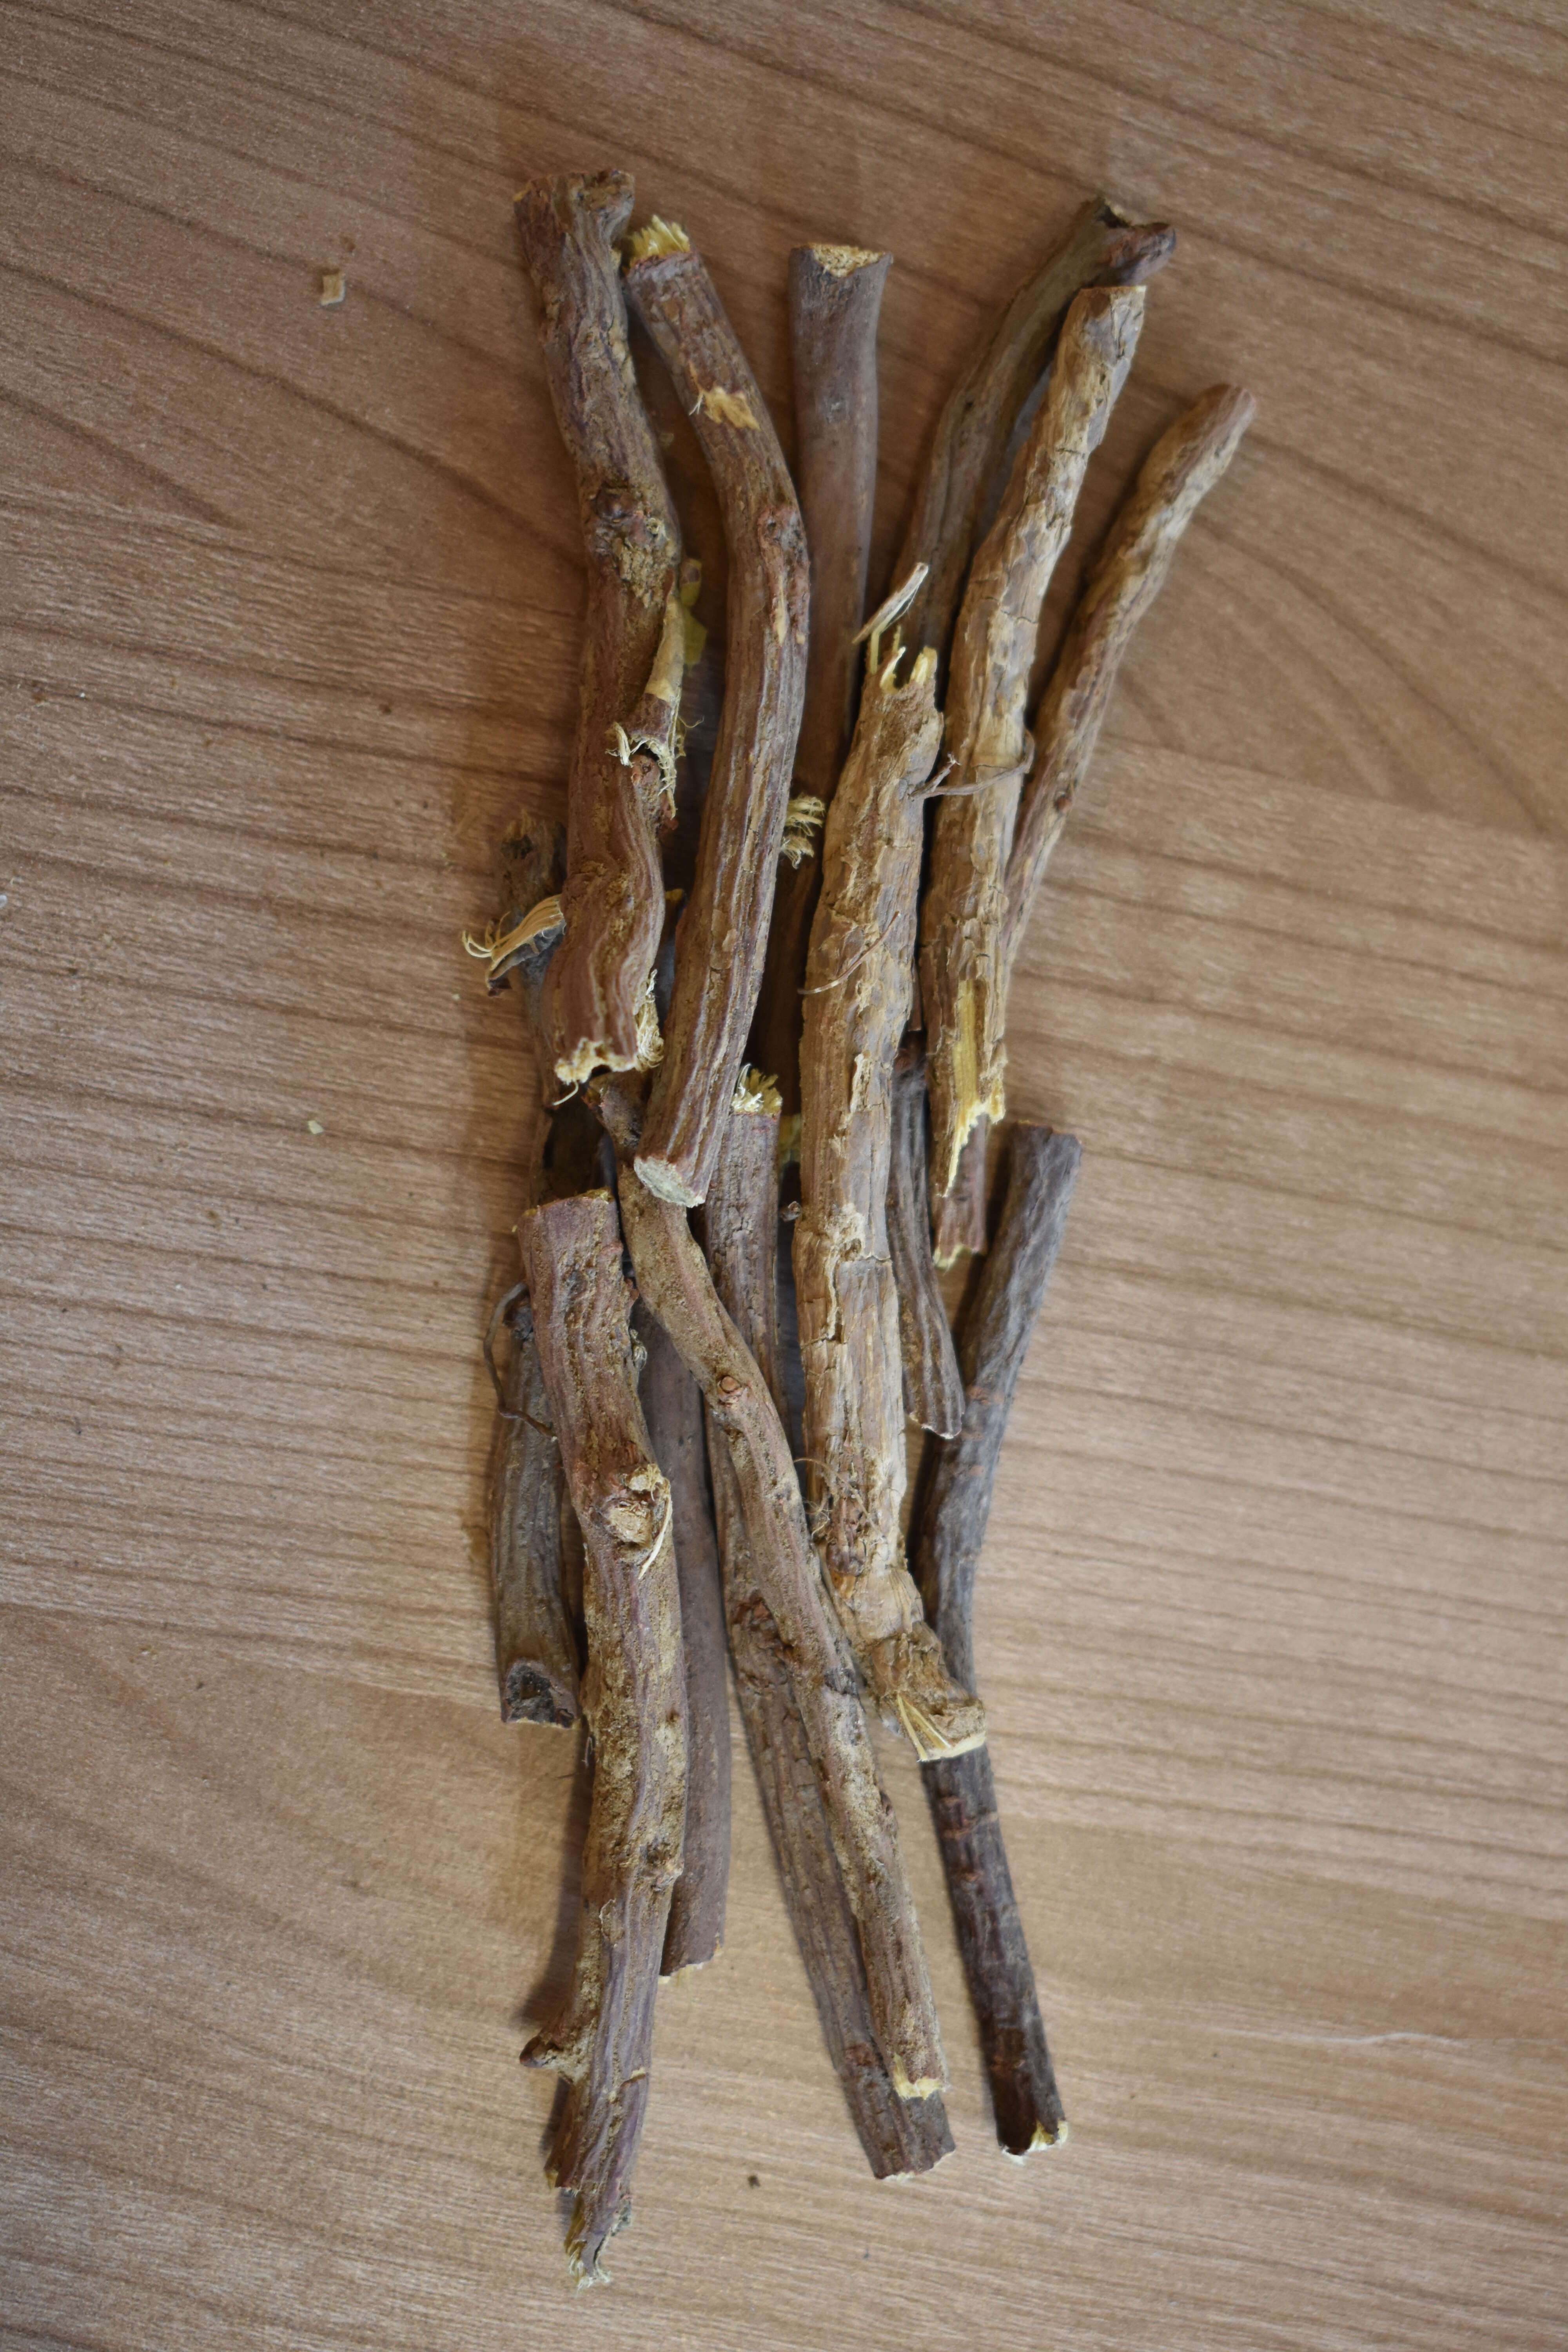 Image of cultivated licorice